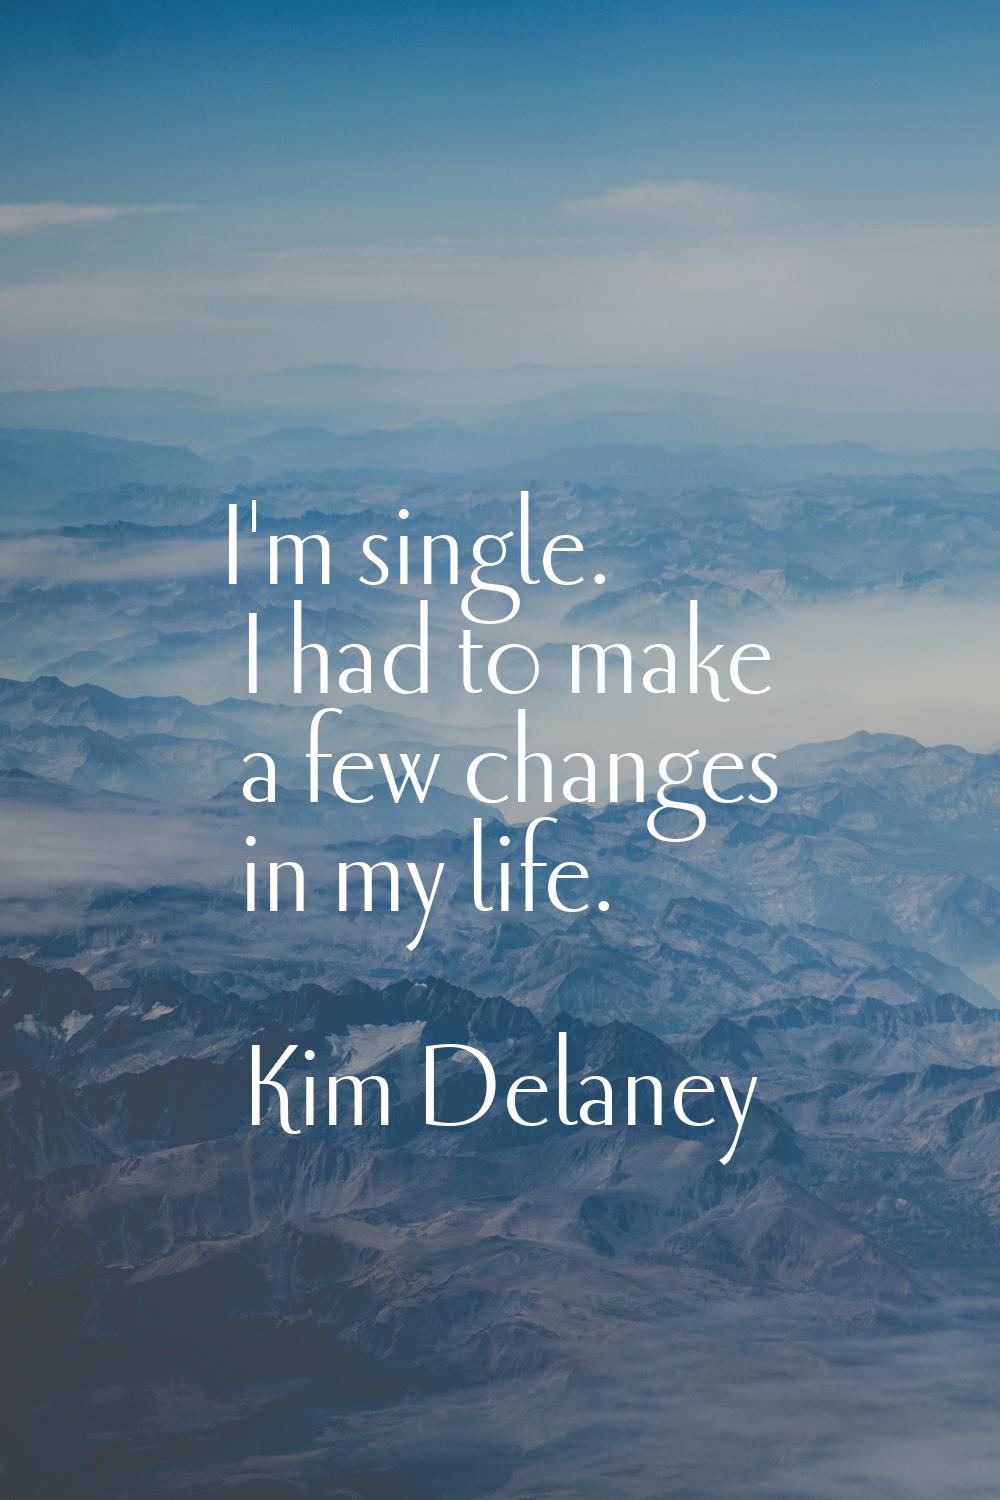 I'm single. I had to make a few changes in my life.